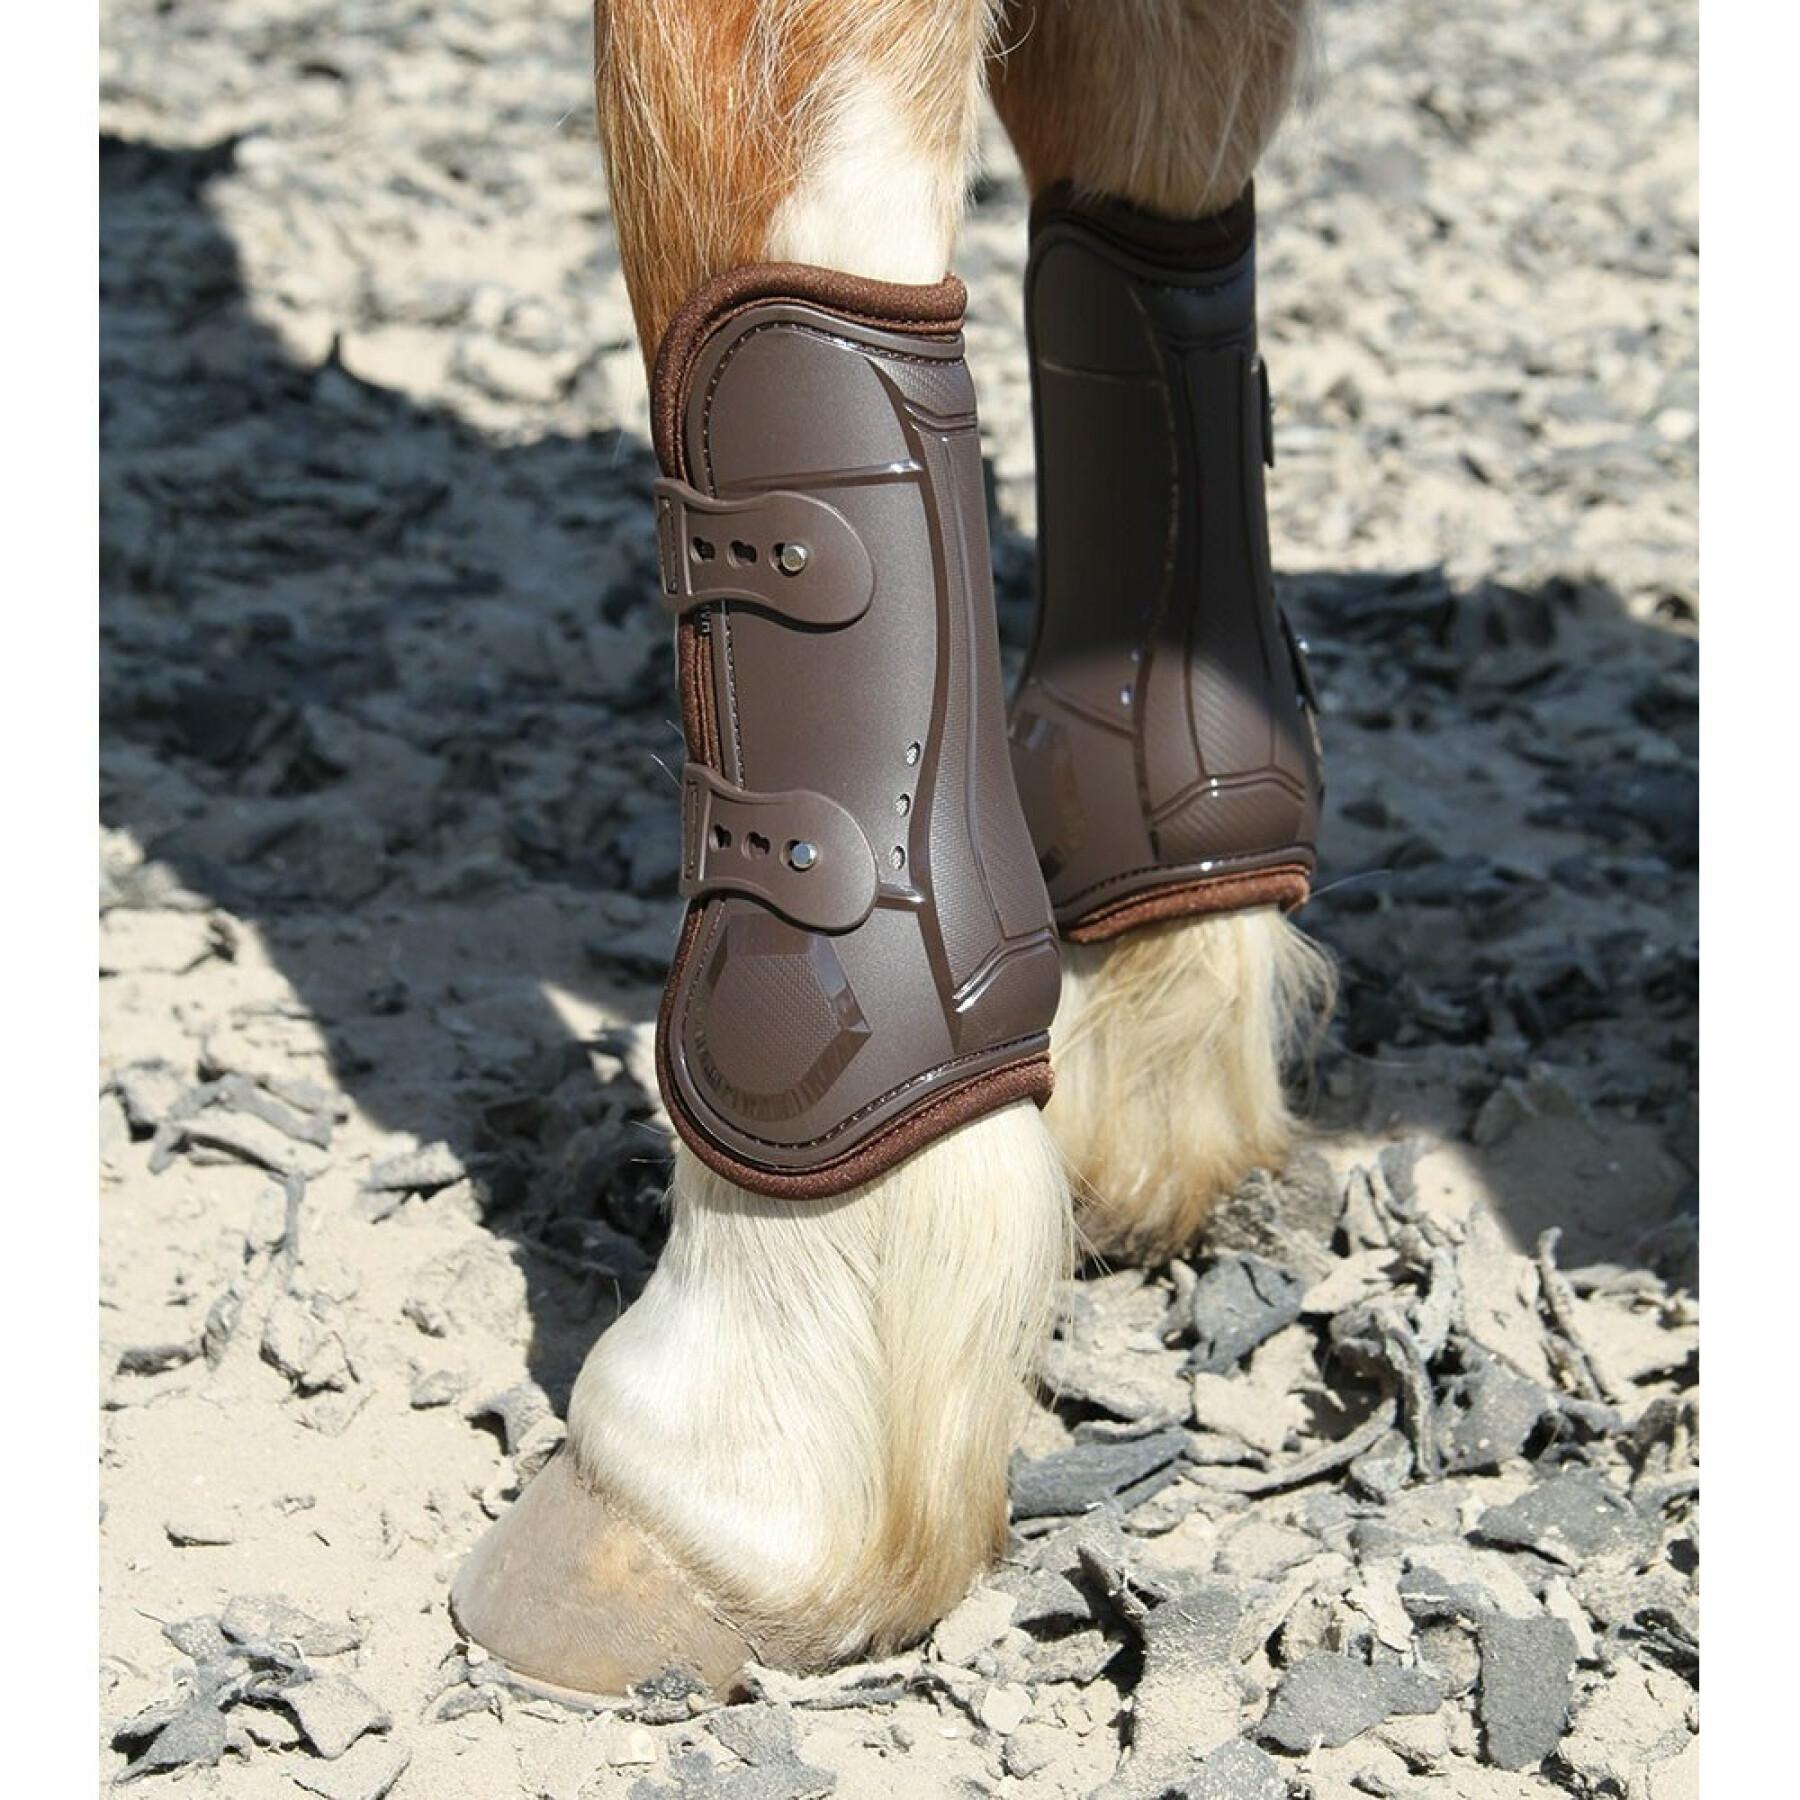 Knee protector for horses Harry's Horse Peesbeschermers Percy air